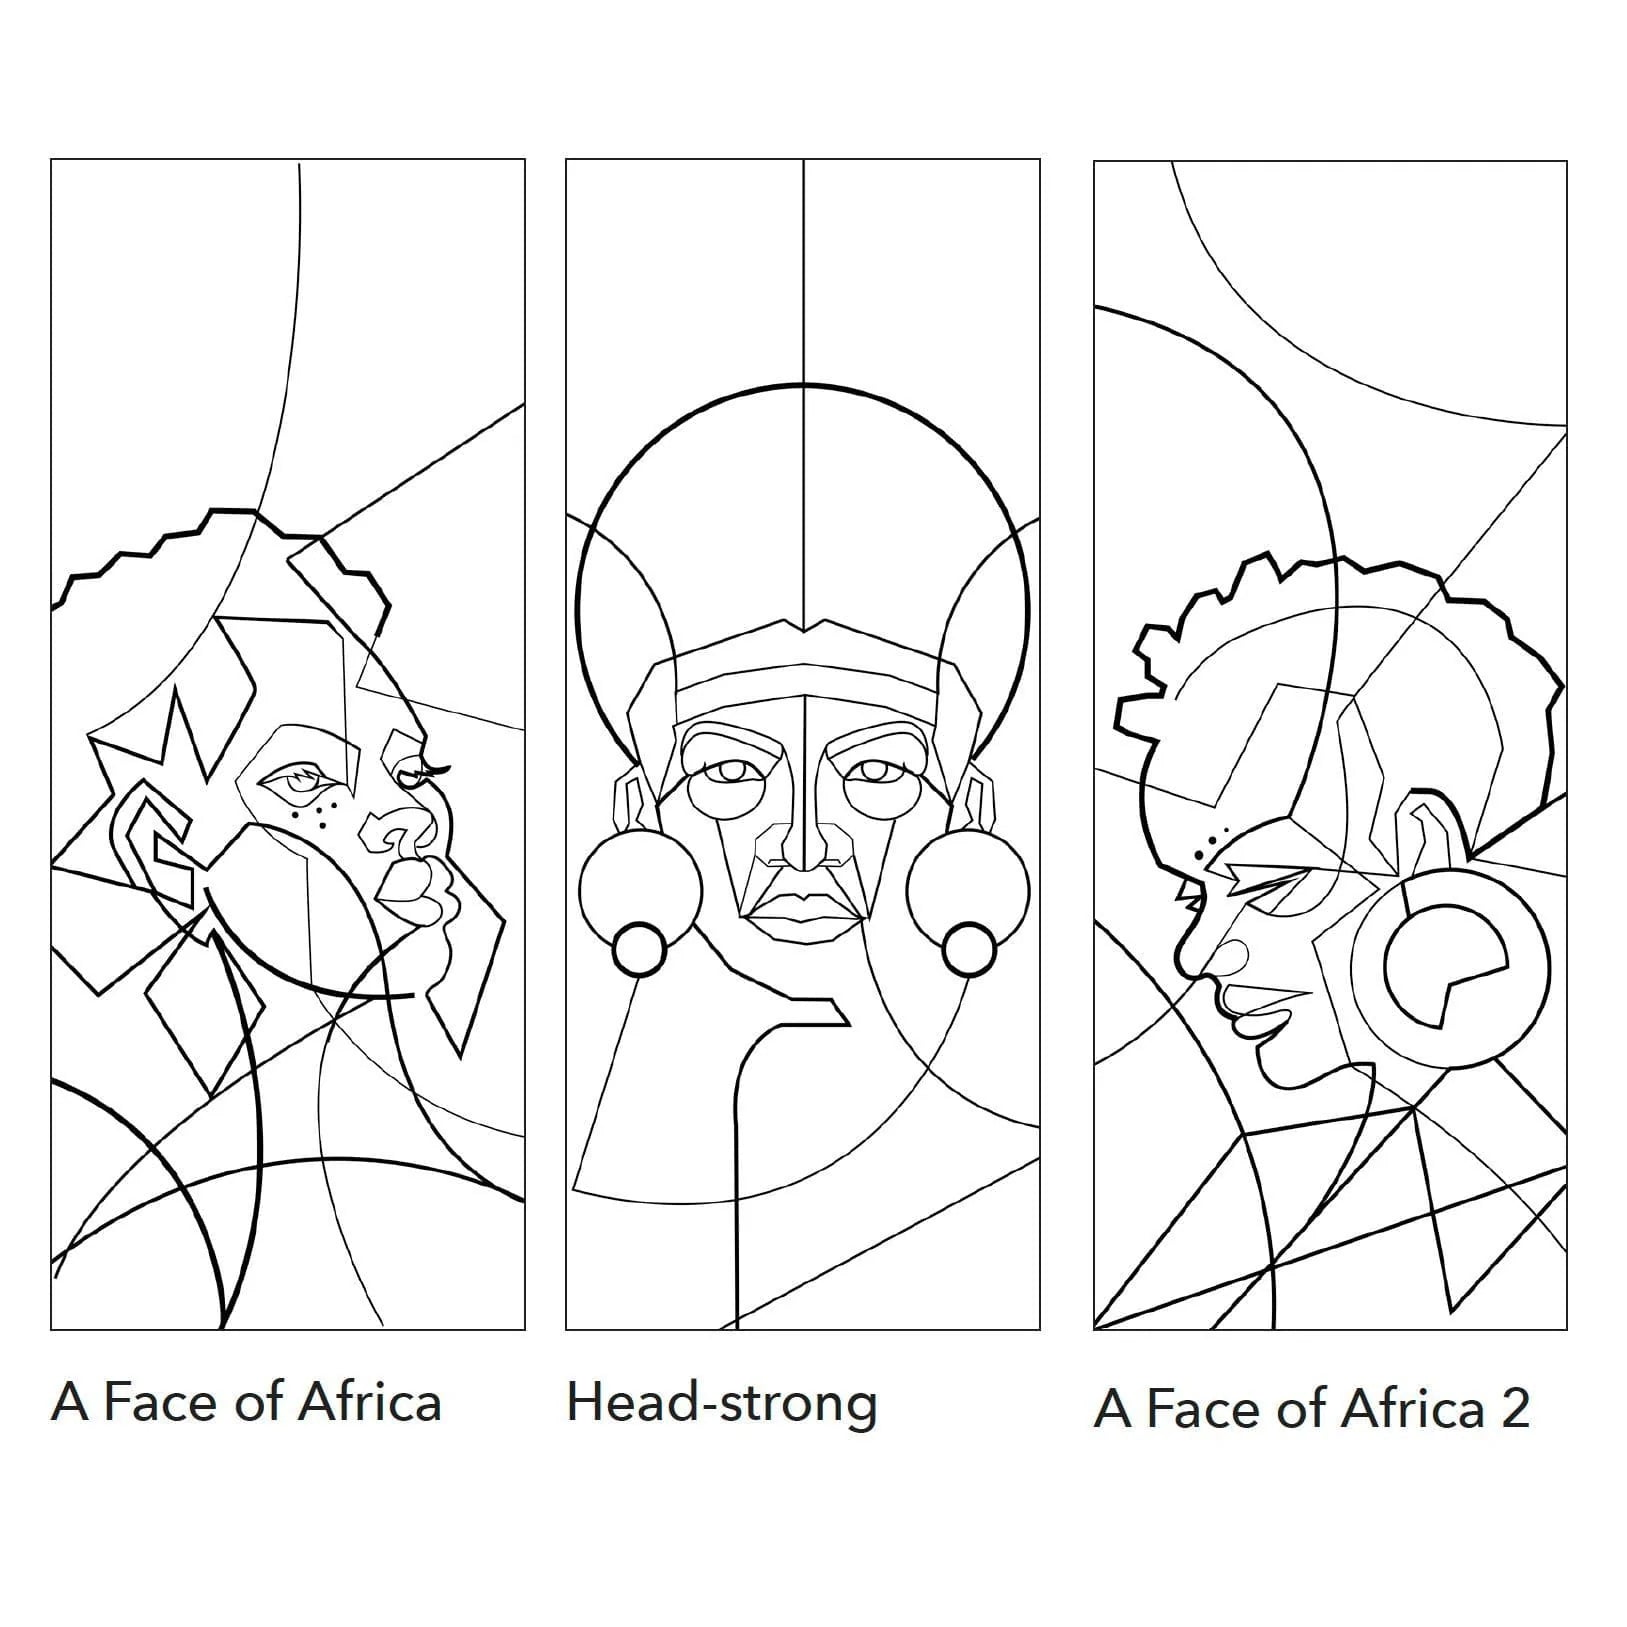 A Face of Africa 2